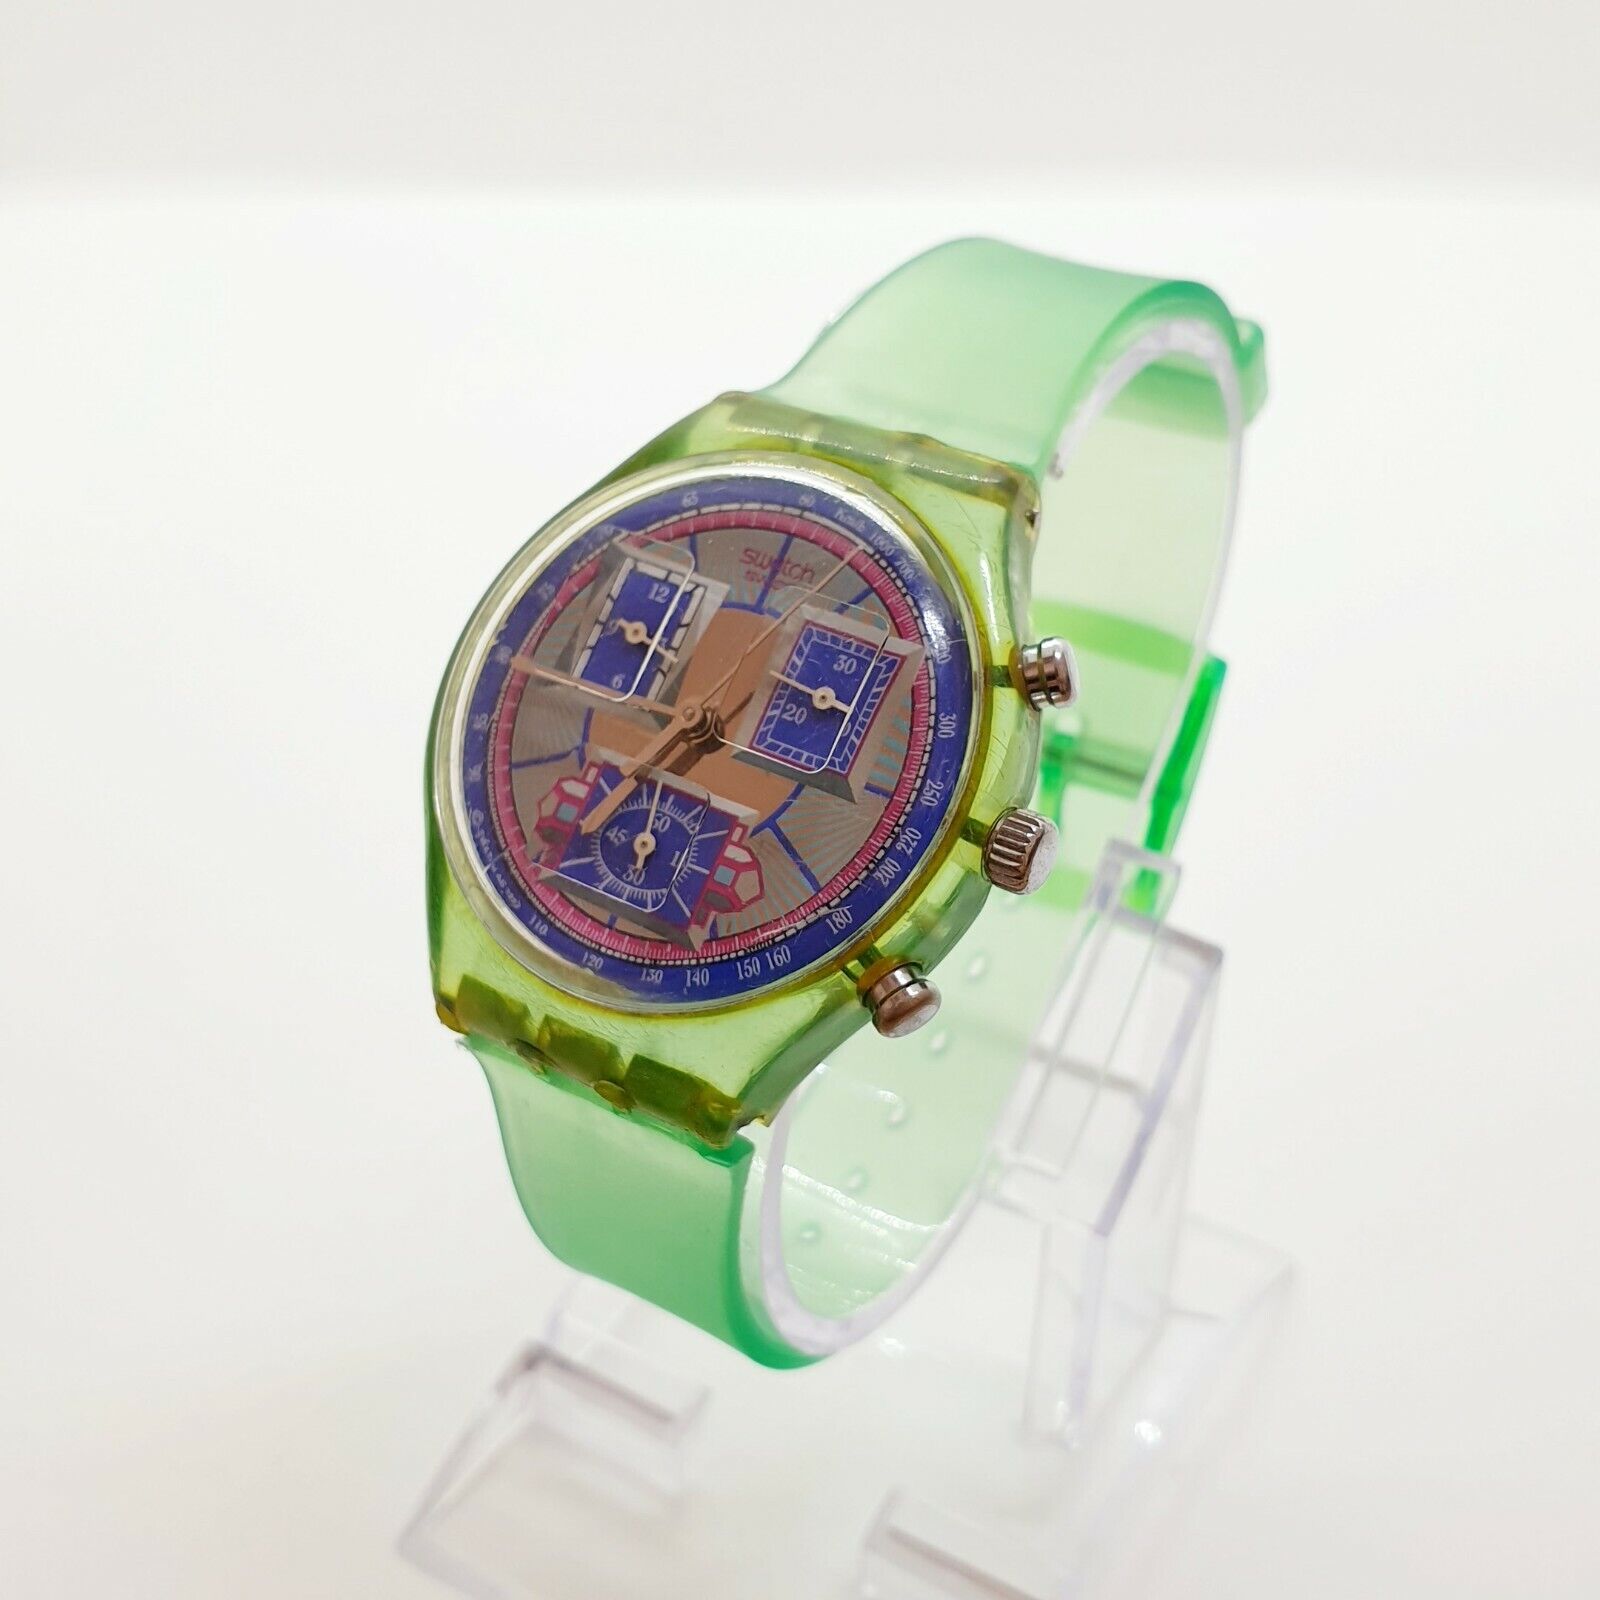 1993 Swiss Made Swatch Chronograph Watch for Men and Women Green Case Blue  Dial | eBay